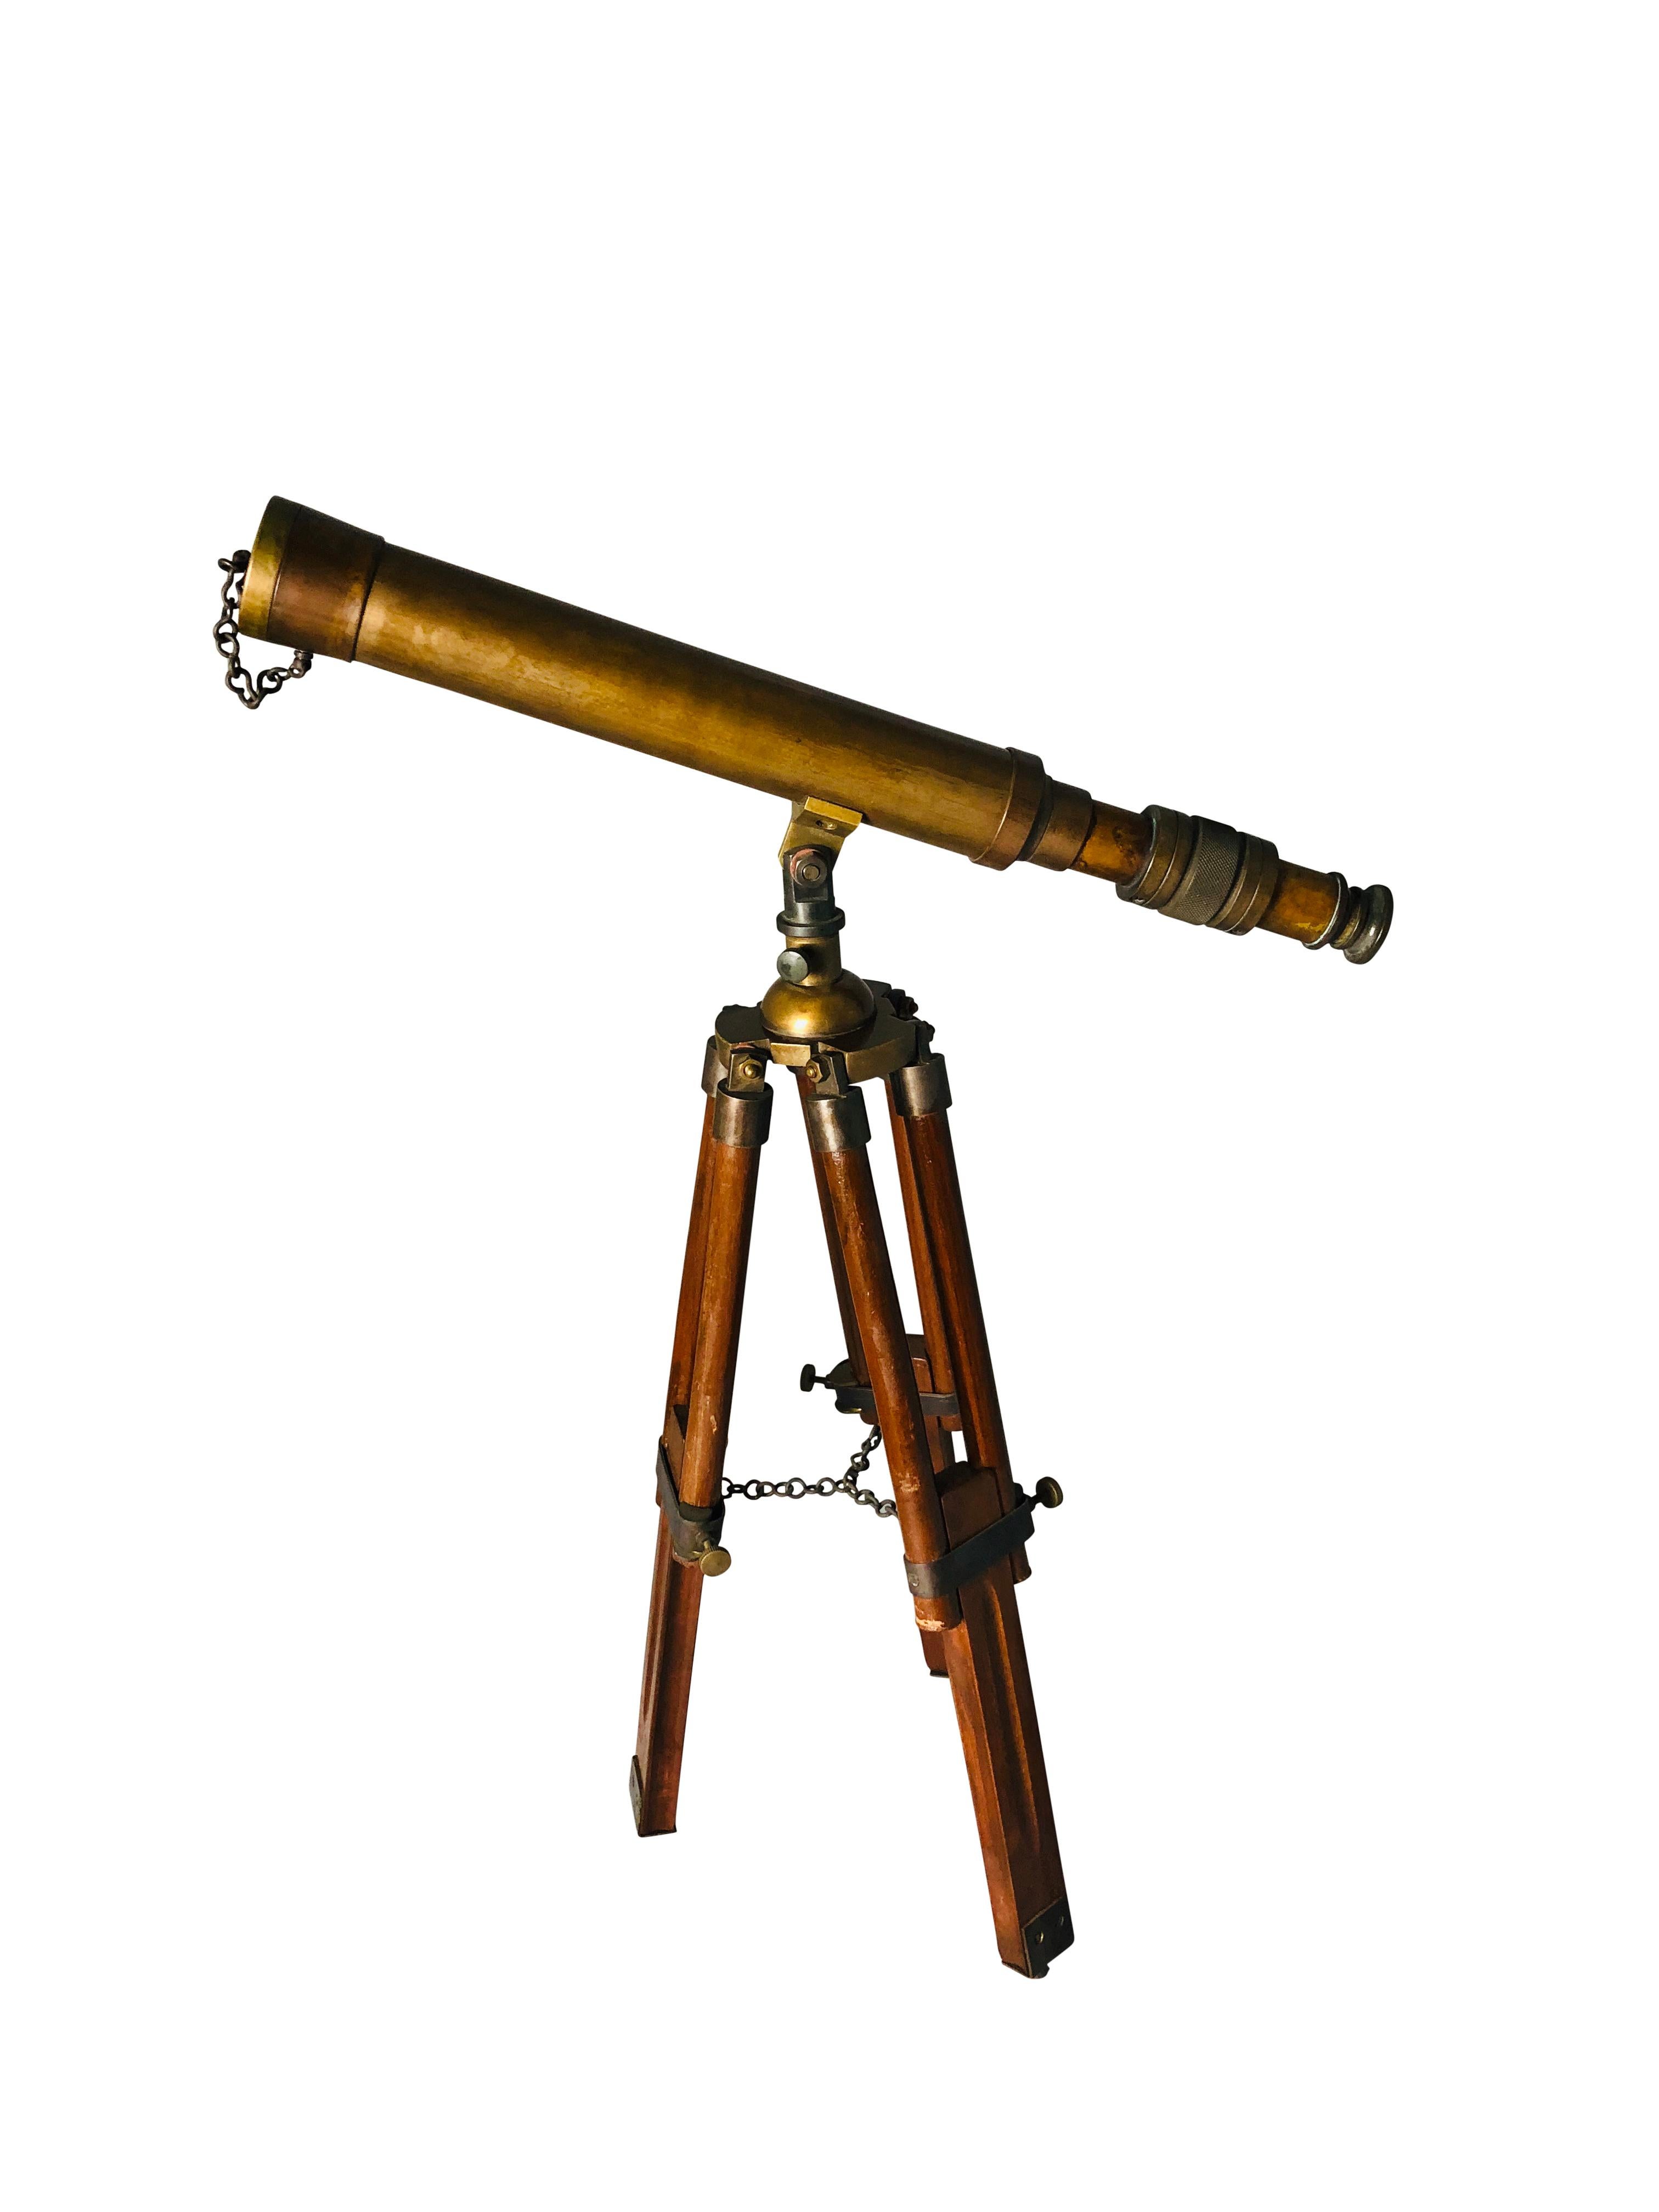 A beautiful 20th century English brass telescope on an adjustable mahogany tripod base. Offered in complete original condition. An amazing addition for a home.